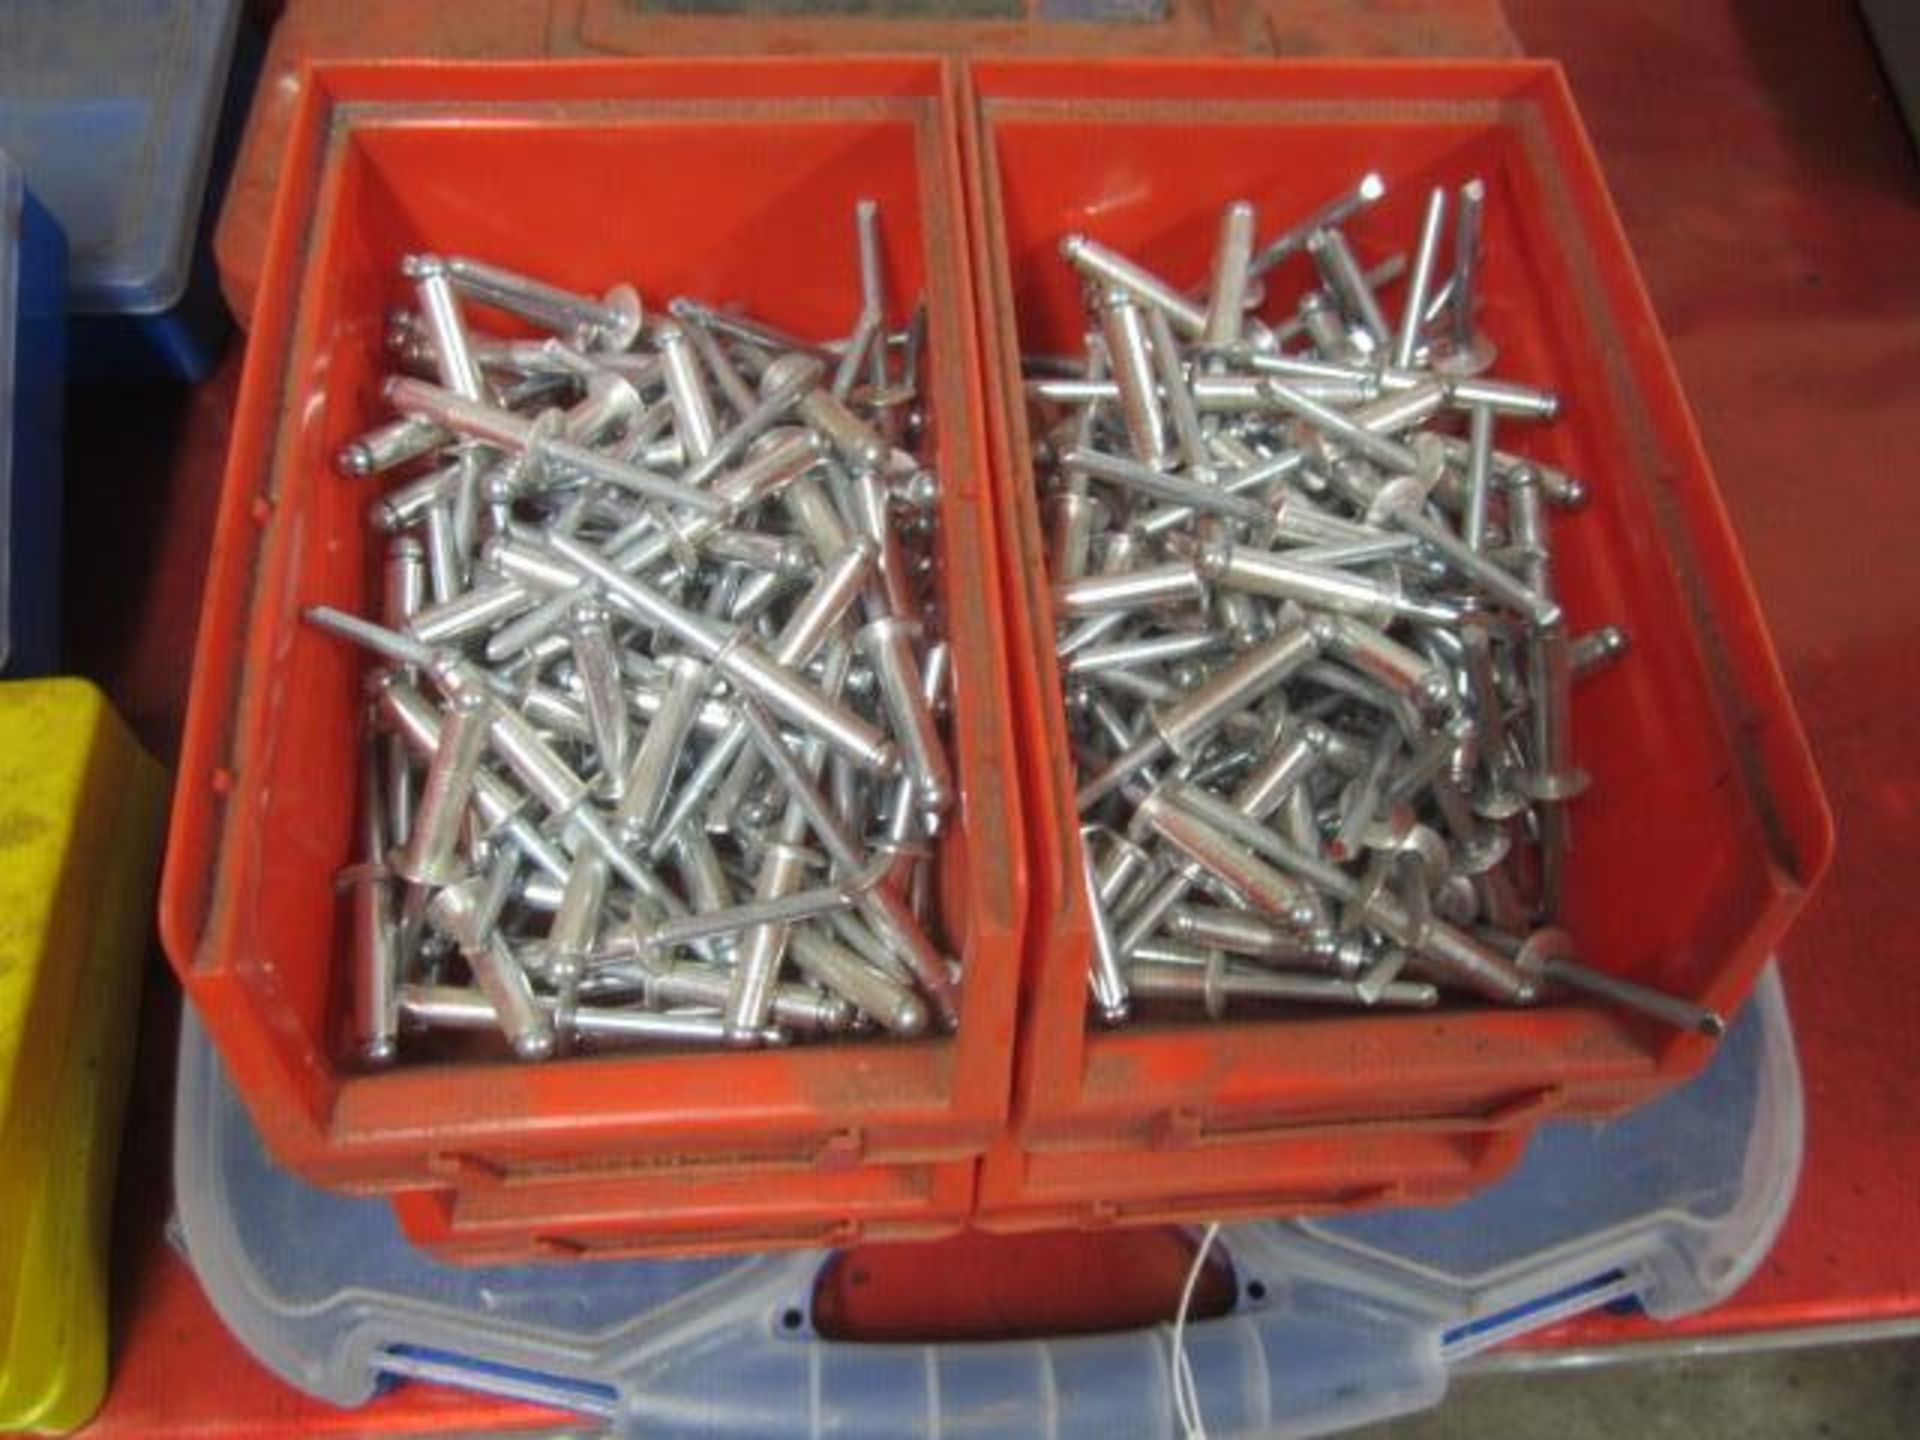 Consumable stock including heat shrink tubing, rivets, screws, 'O' rings, rawl plugs, etc. - Image 5 of 8